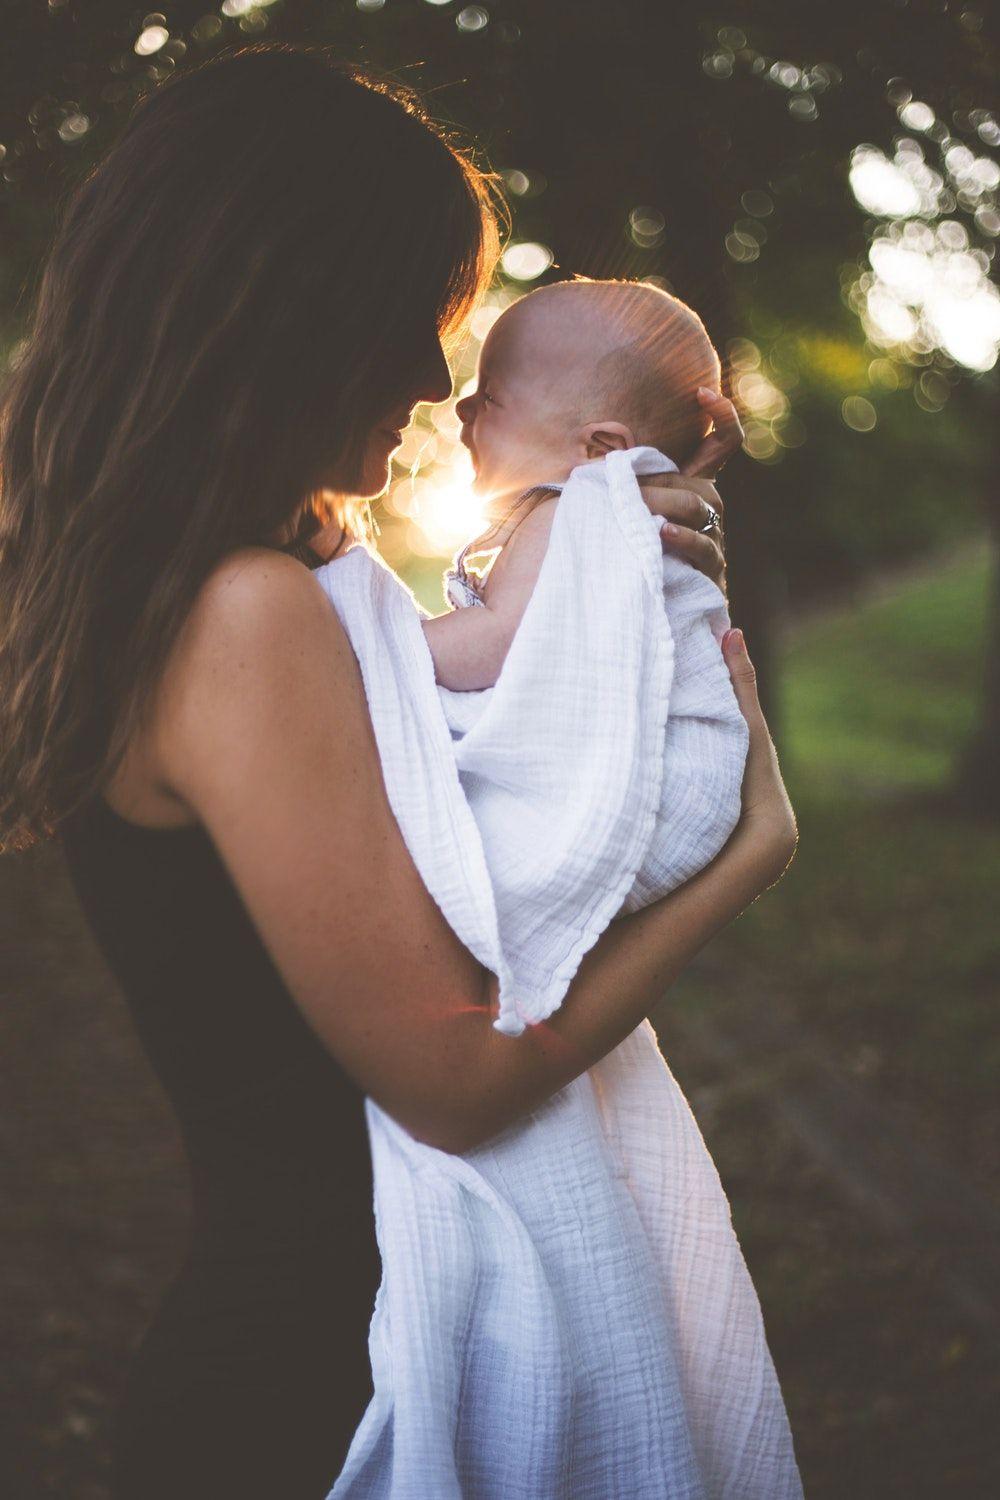 Woman Holding Baby Blue Logo - 500+ Mother And Child Pictures [HD] | Download Free Images on Unsplash